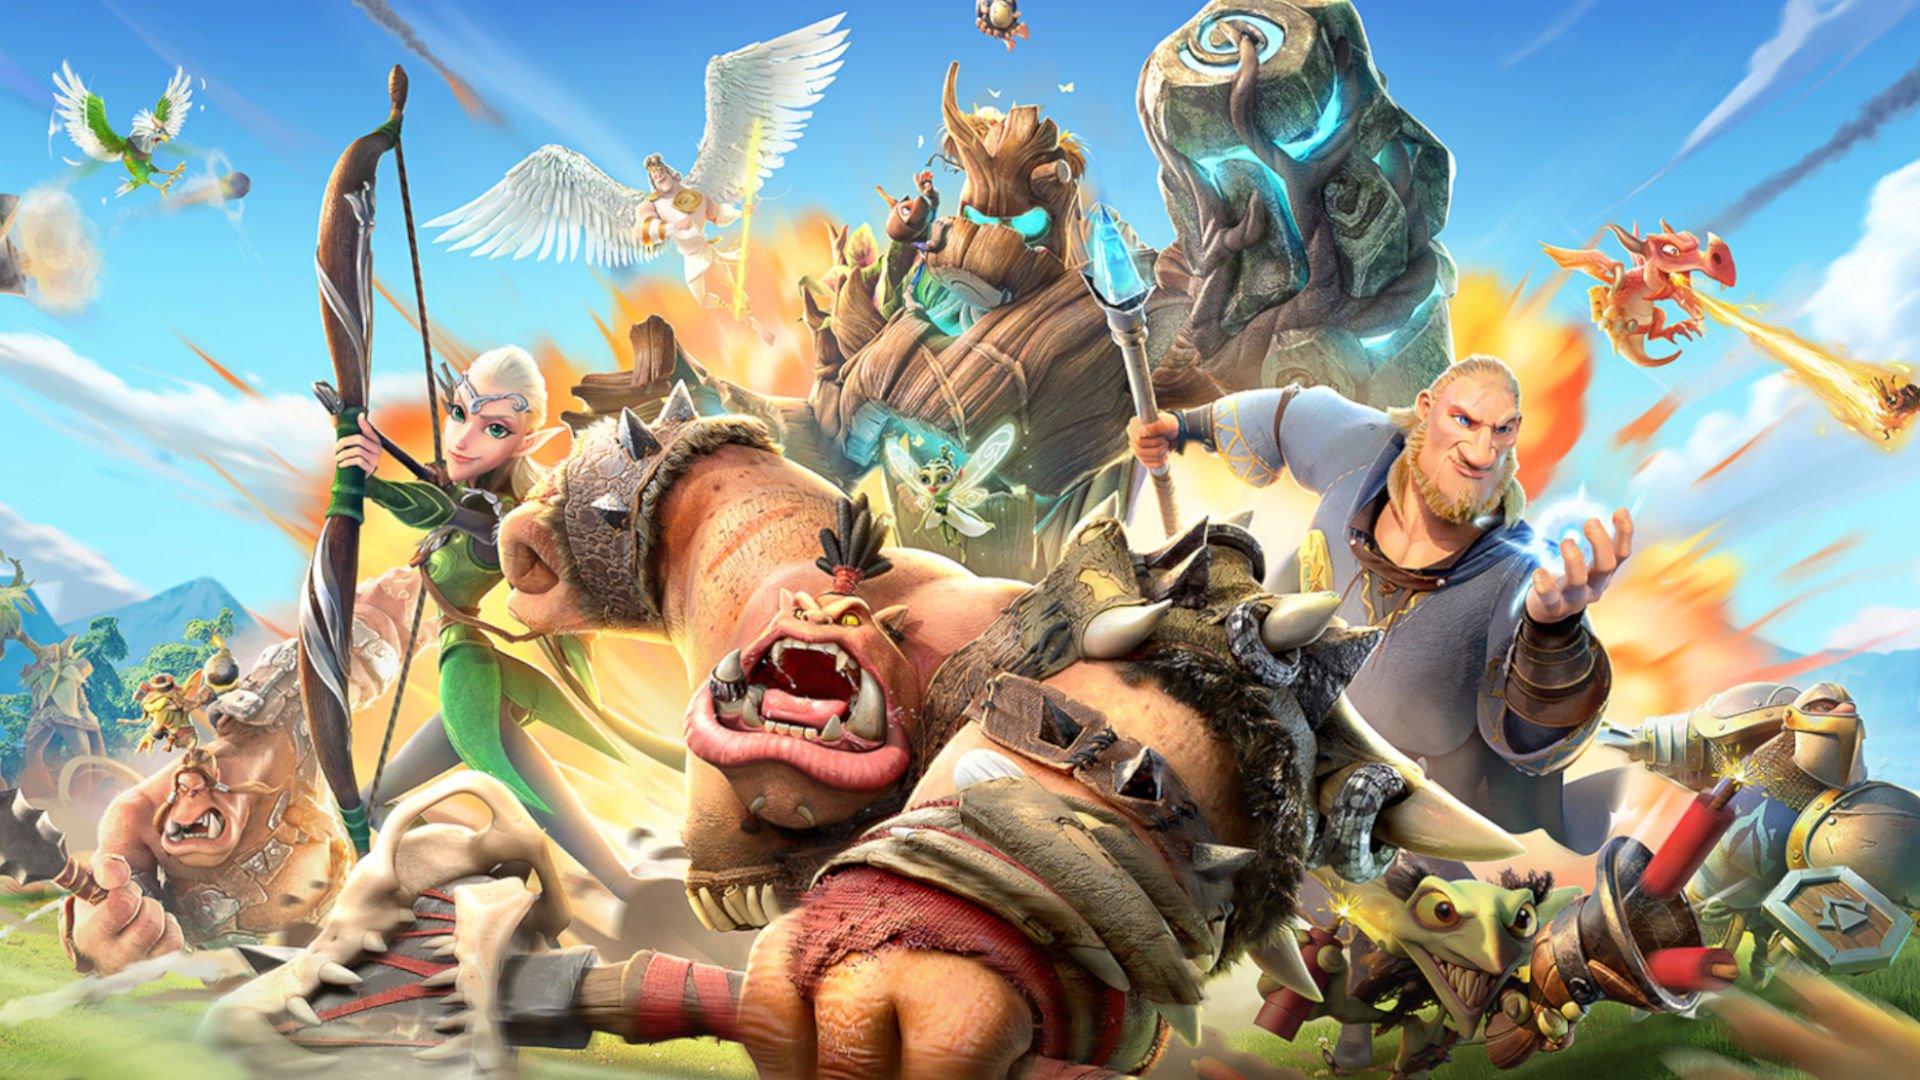 Mobile game Call of Dragons now available on iOS and Android